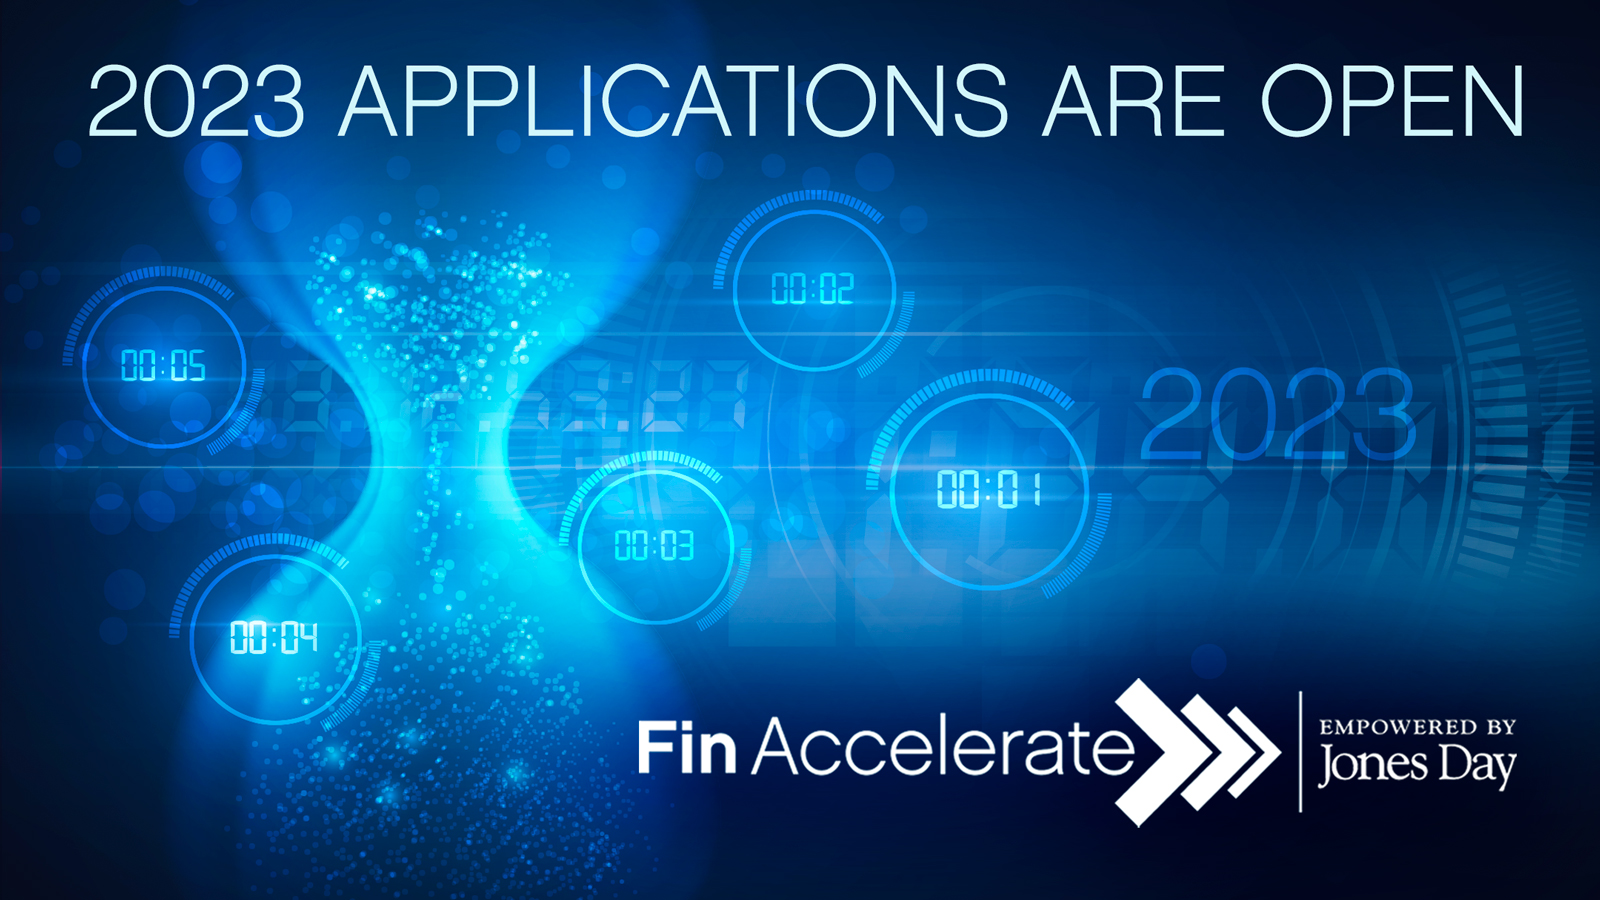 FinAccelerateApplicationsOfficiallyOpenLinked